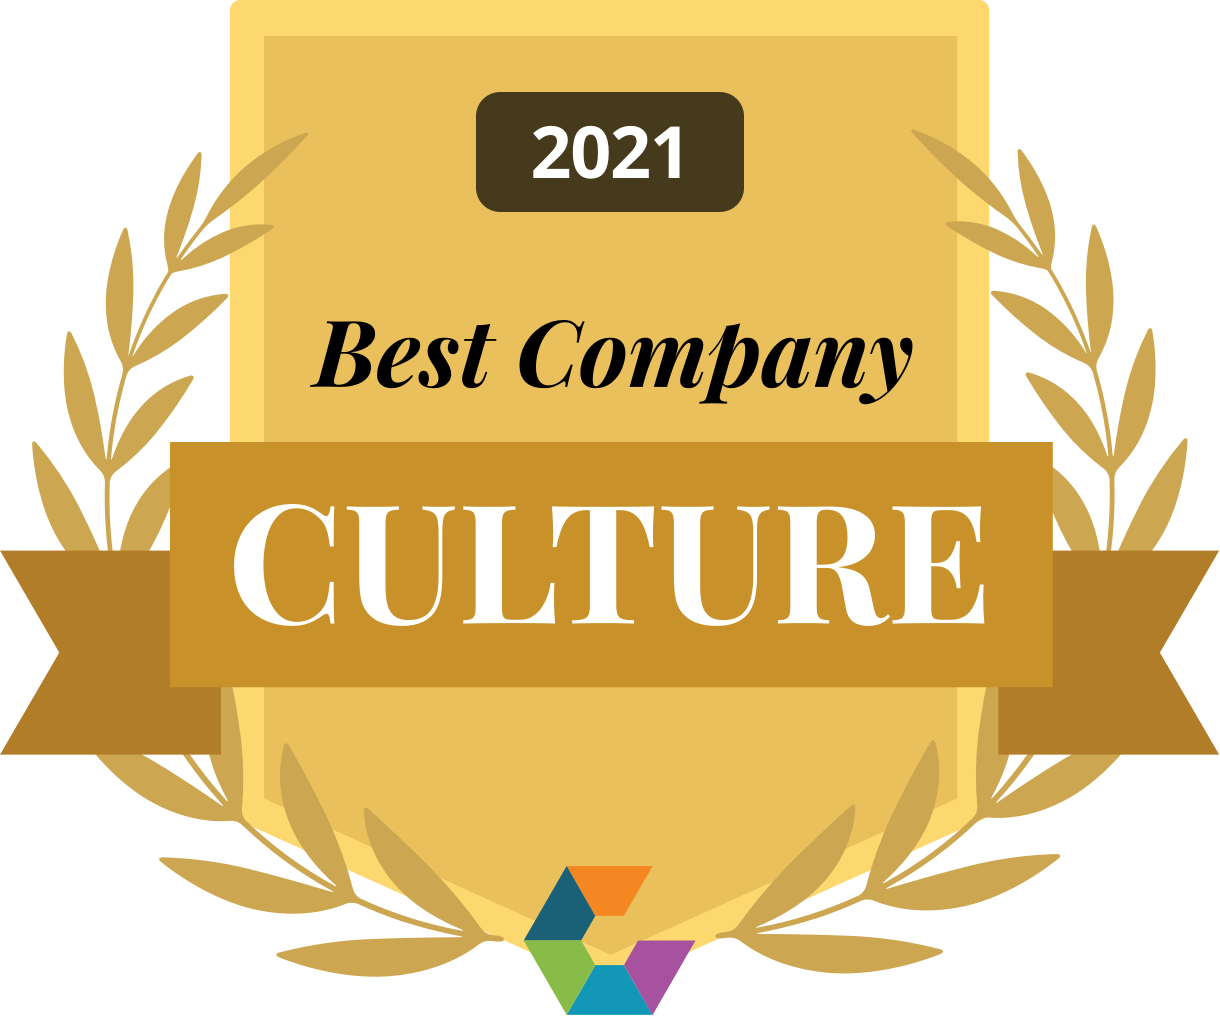 Comparably best company culture 2021